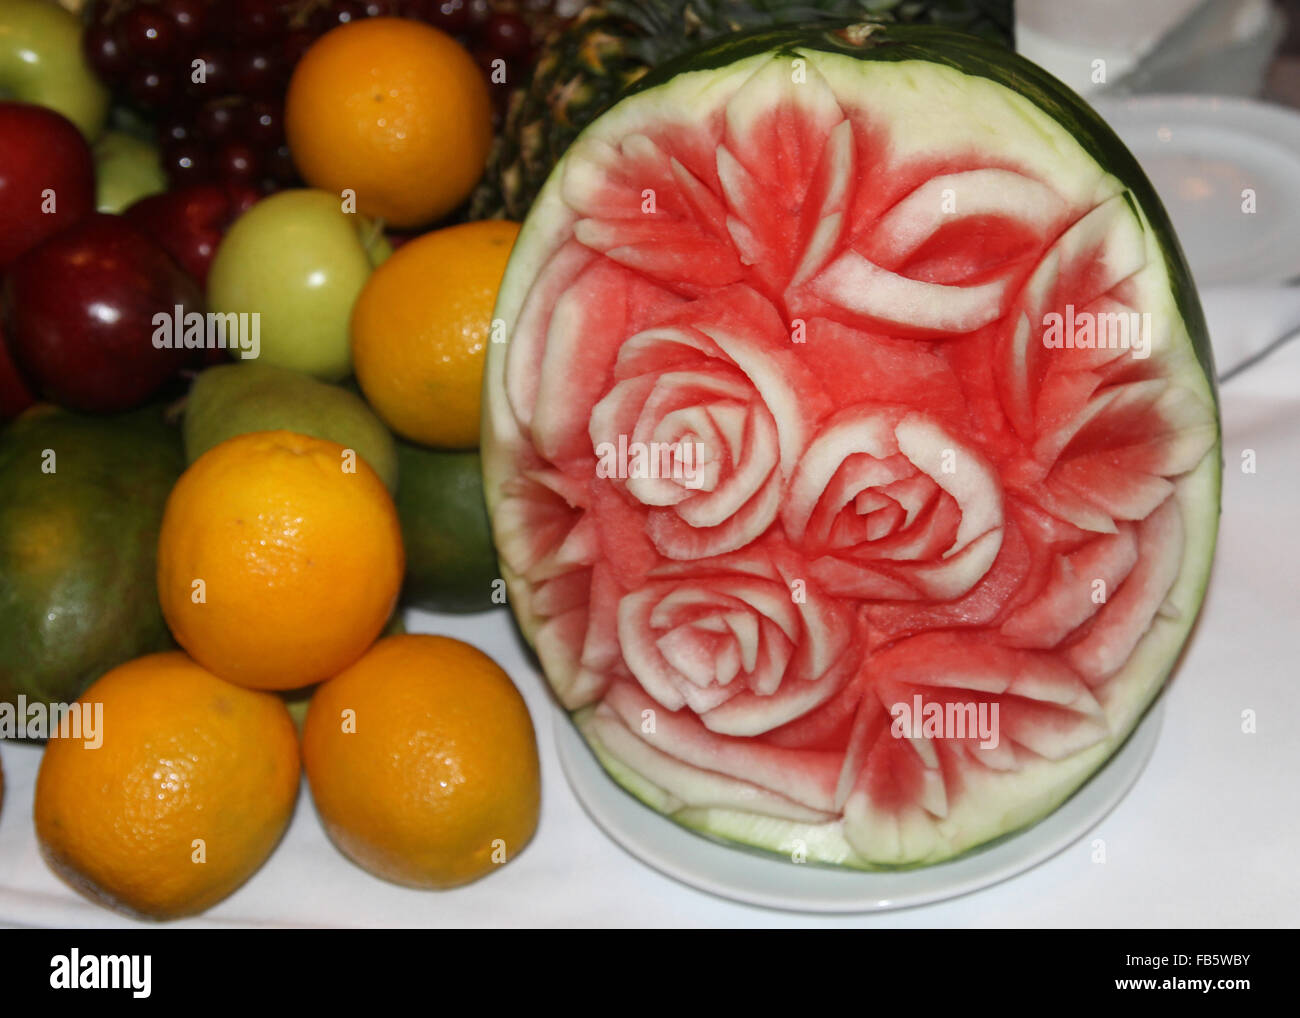 Watermelon sliced in the shape of a flower Stock Photo